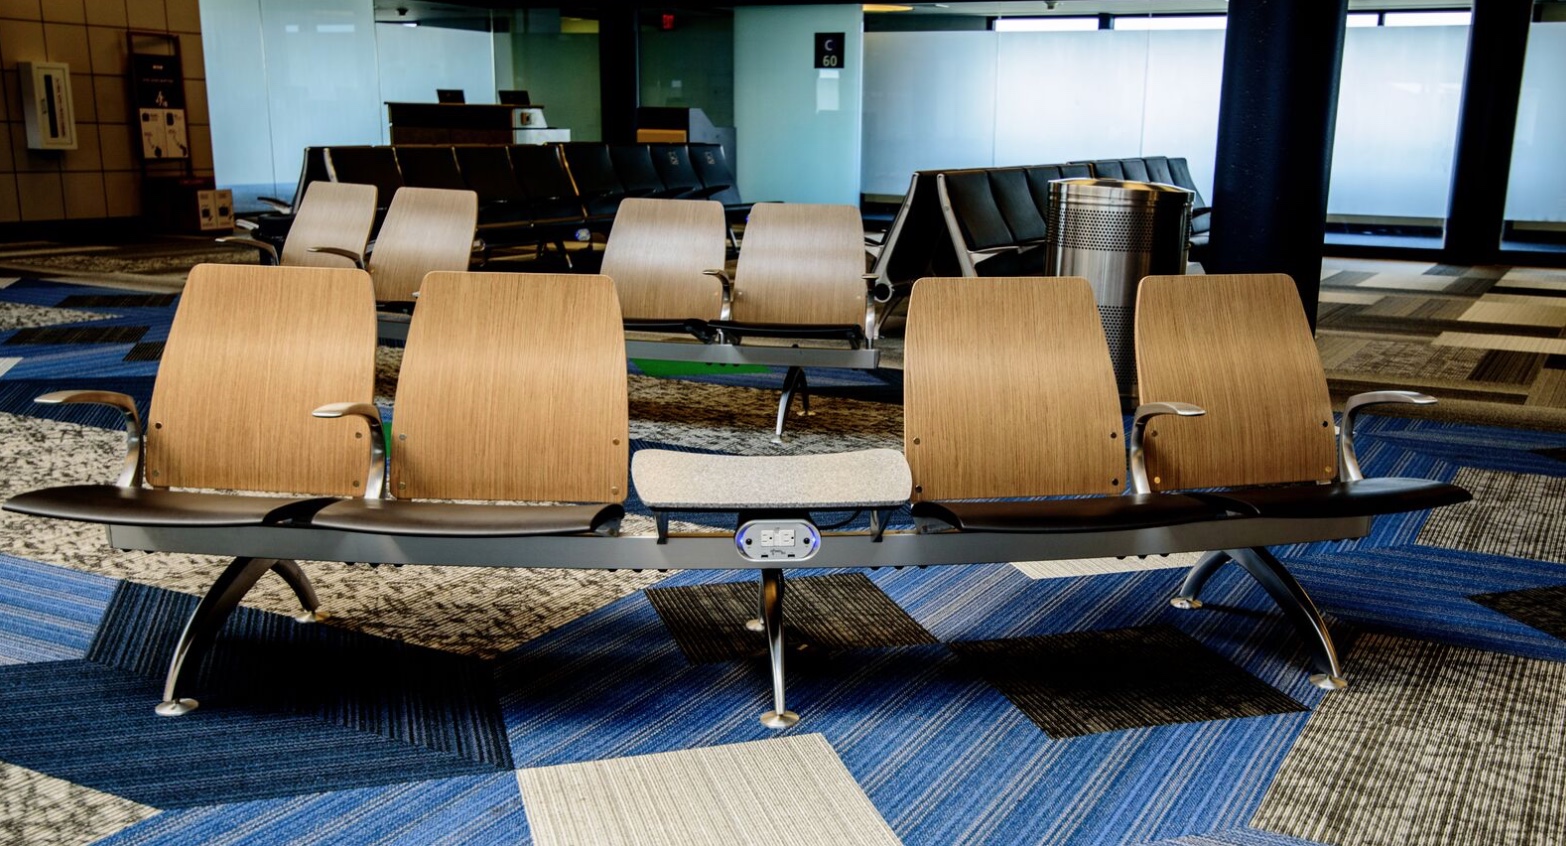 Connectrac's Under-Carpet Wireway Powers-Up Airports